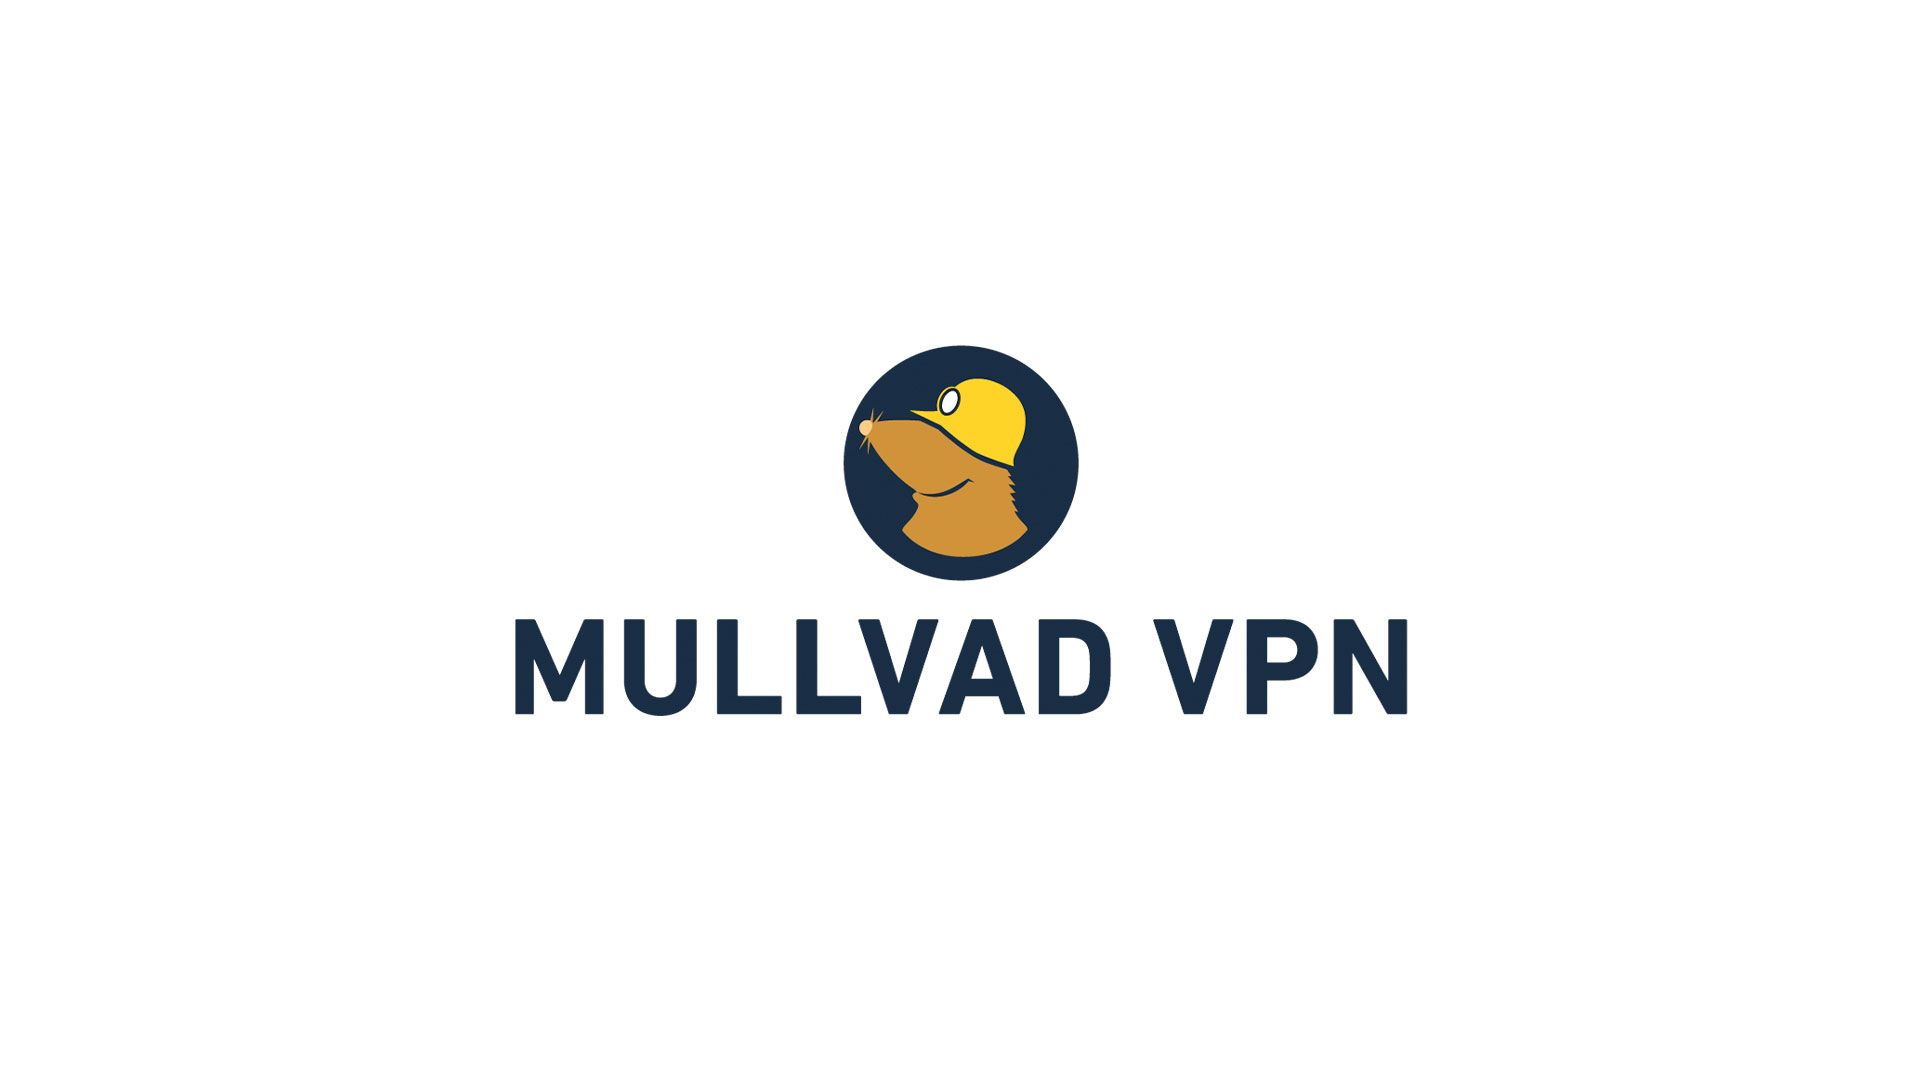 Mullvad logo on a white background